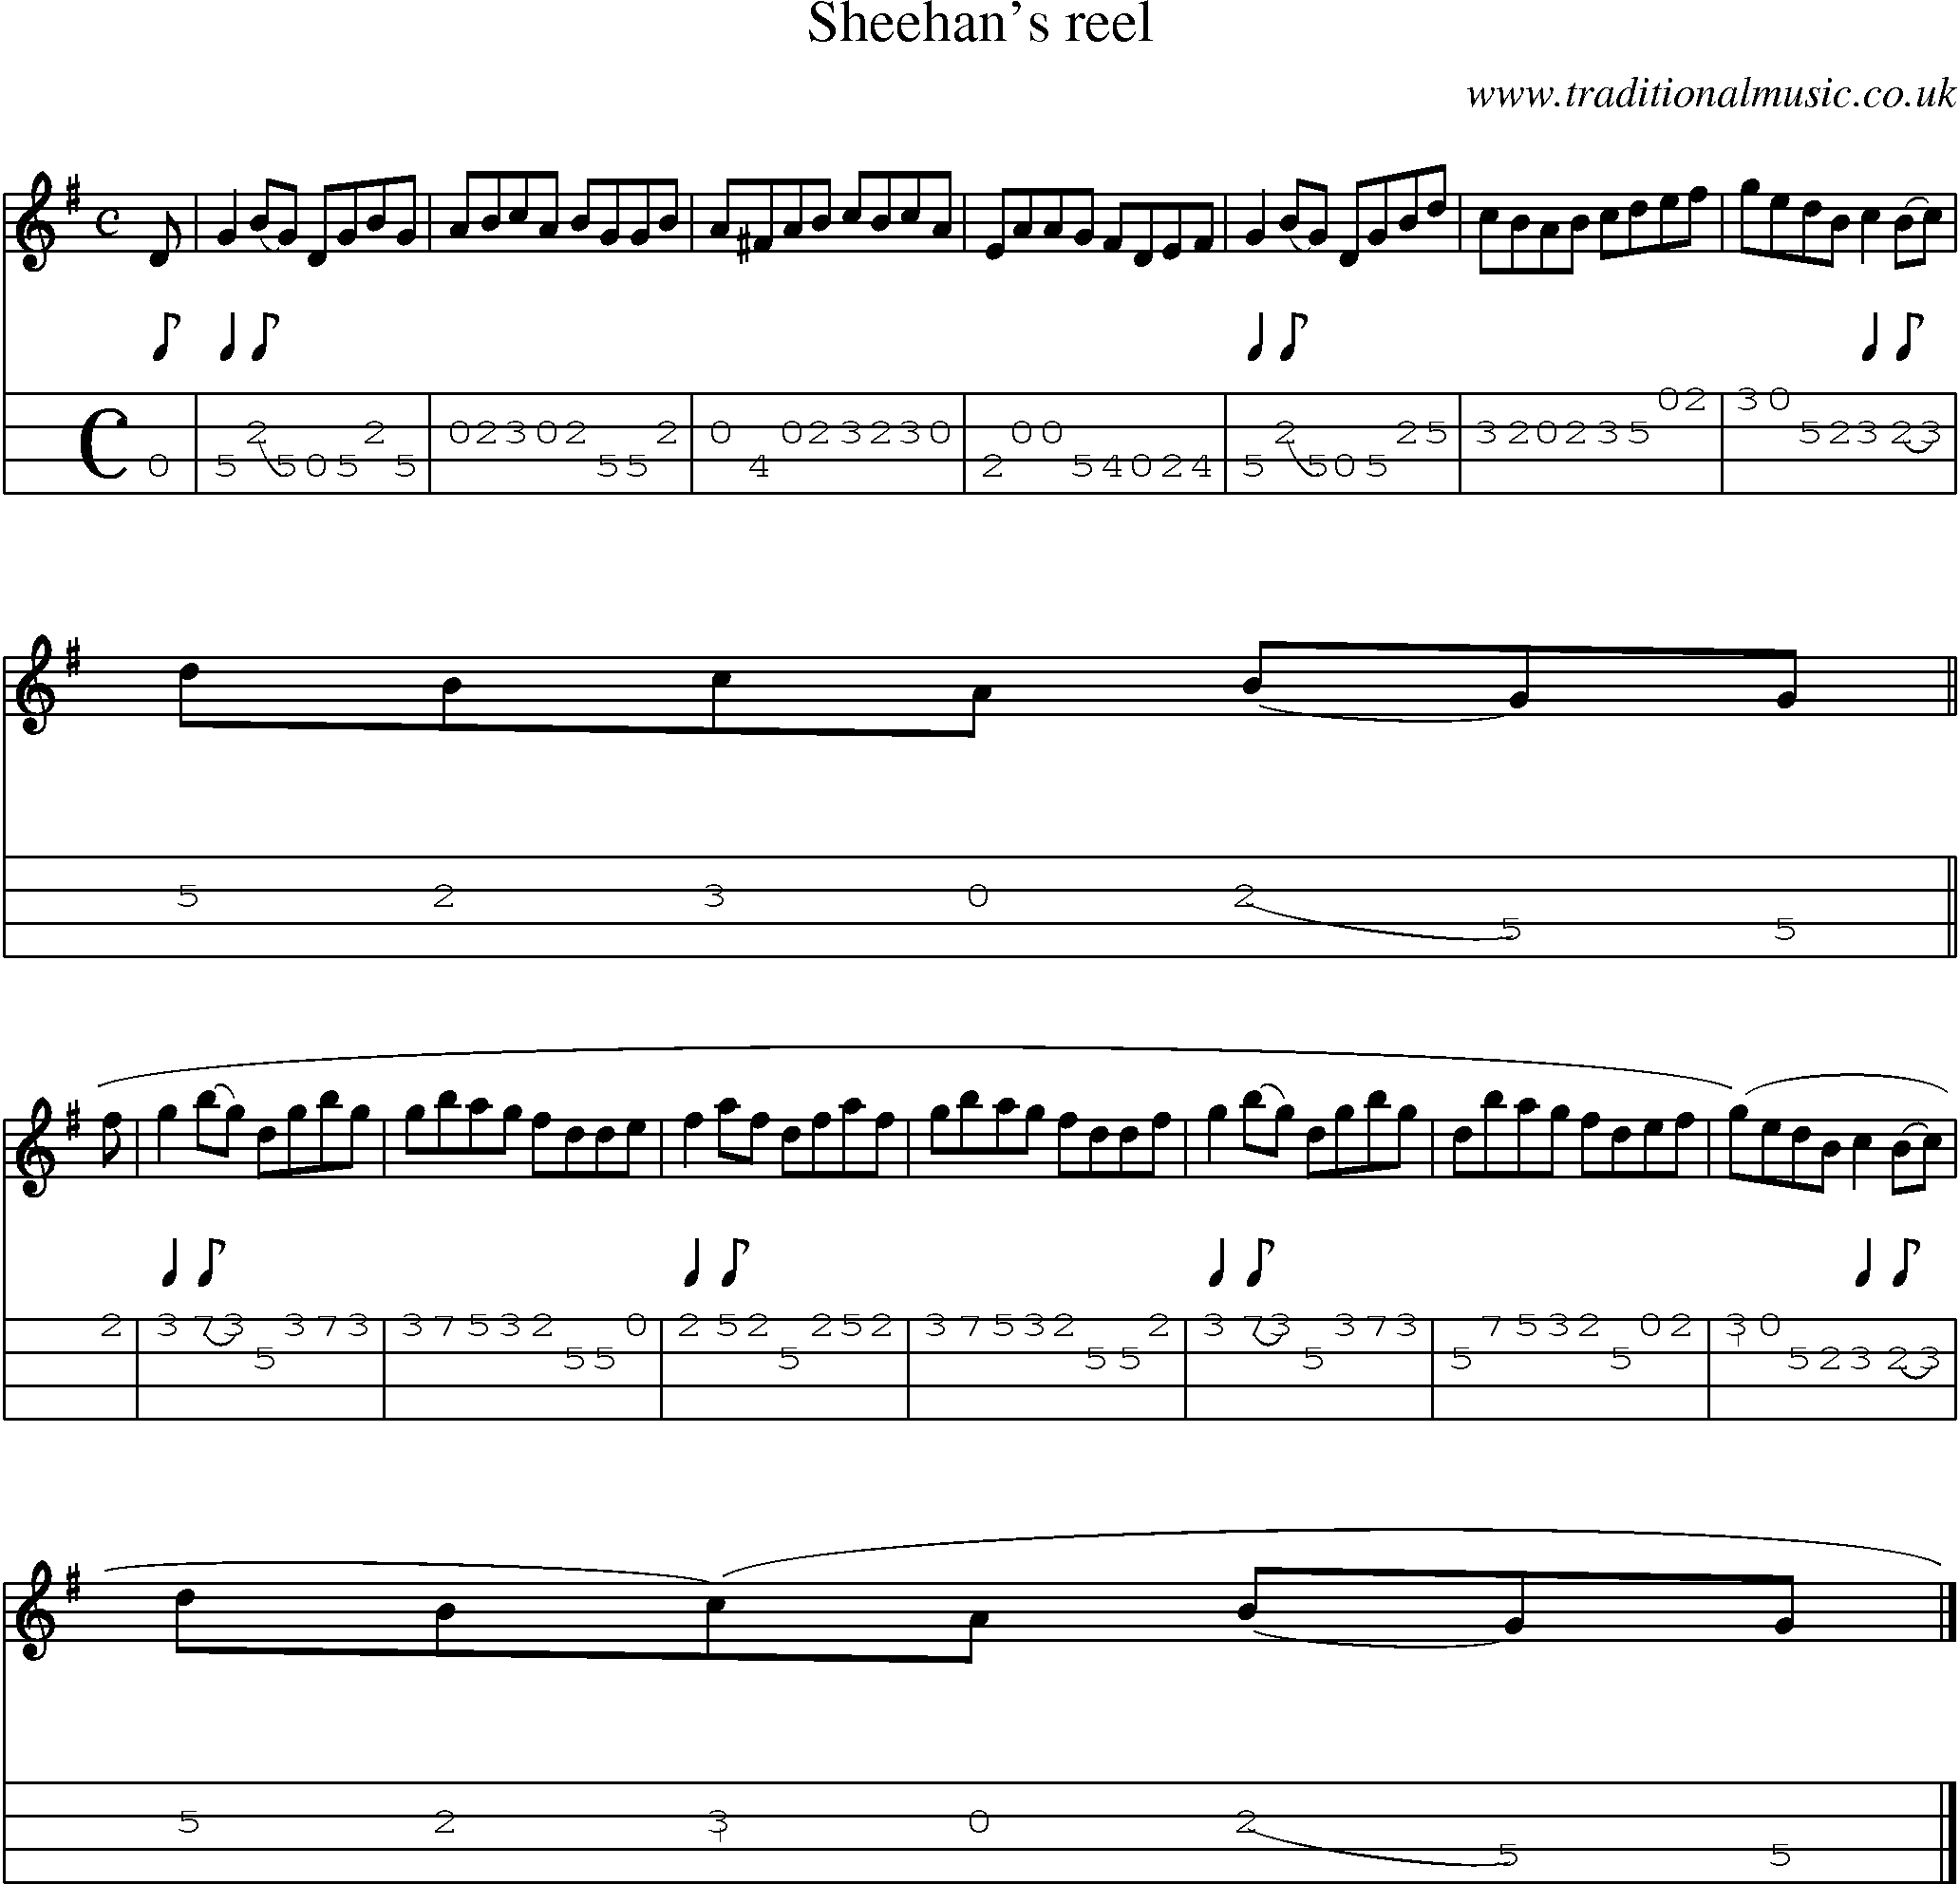 Music Score and Mandolin Tabs for Sheehans Reel